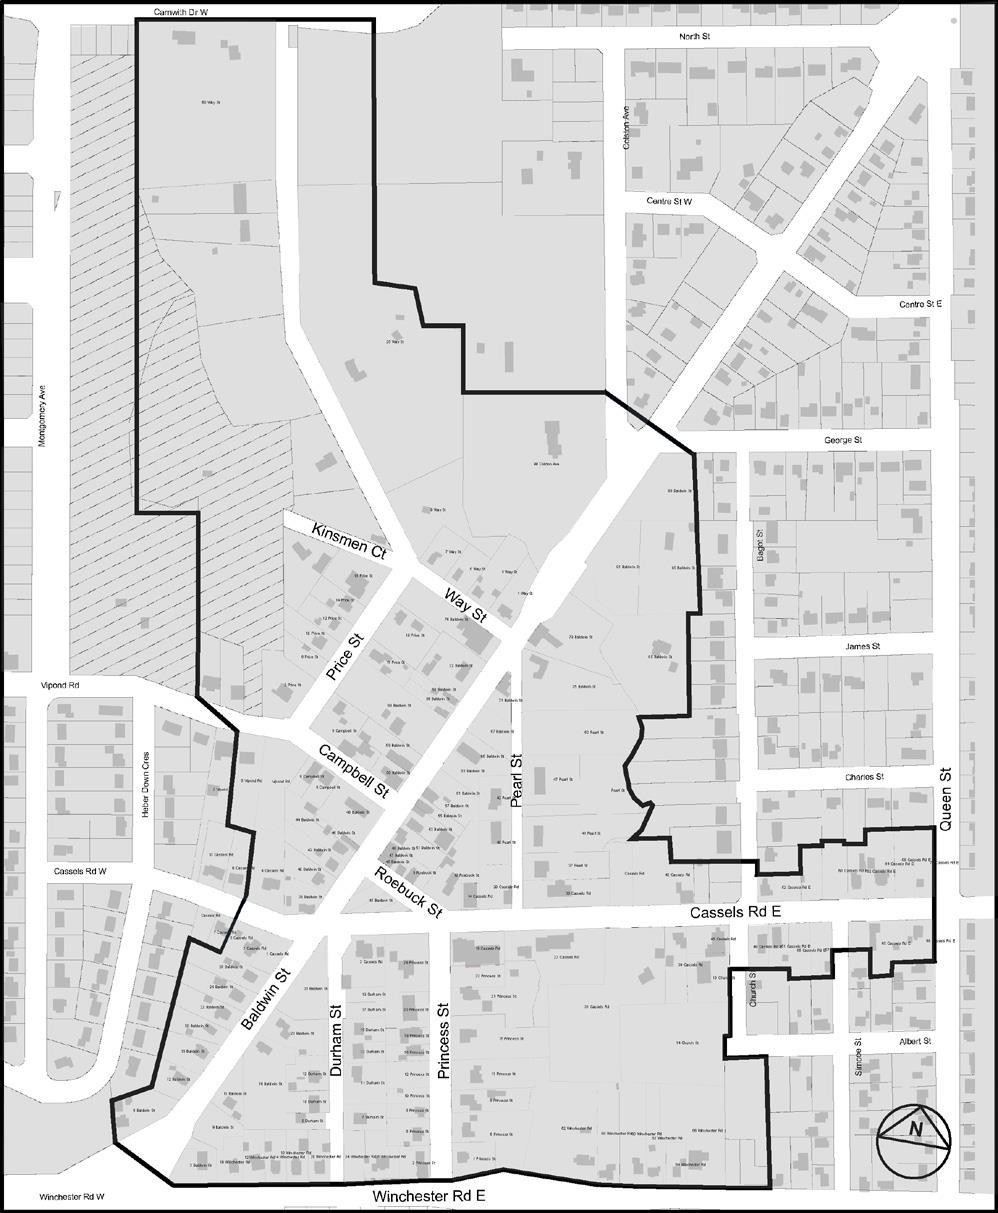 Figure 6: Brooklin Village Heritage Conservation District Boundary from